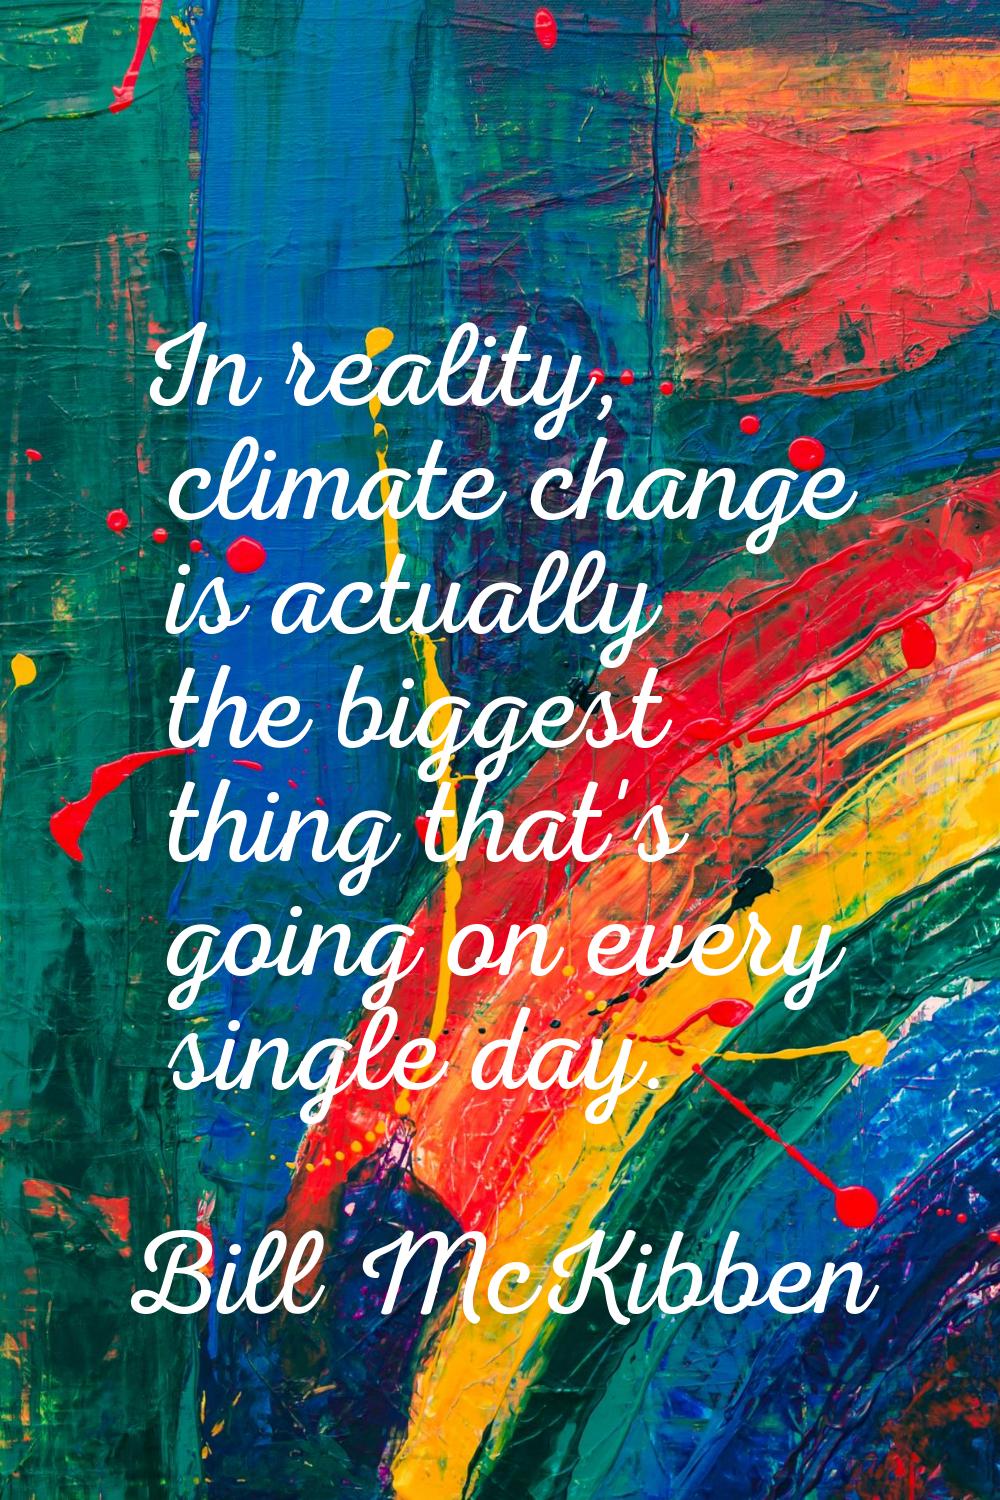 In reality, climate change is actually the biggest thing that's going on every single day.